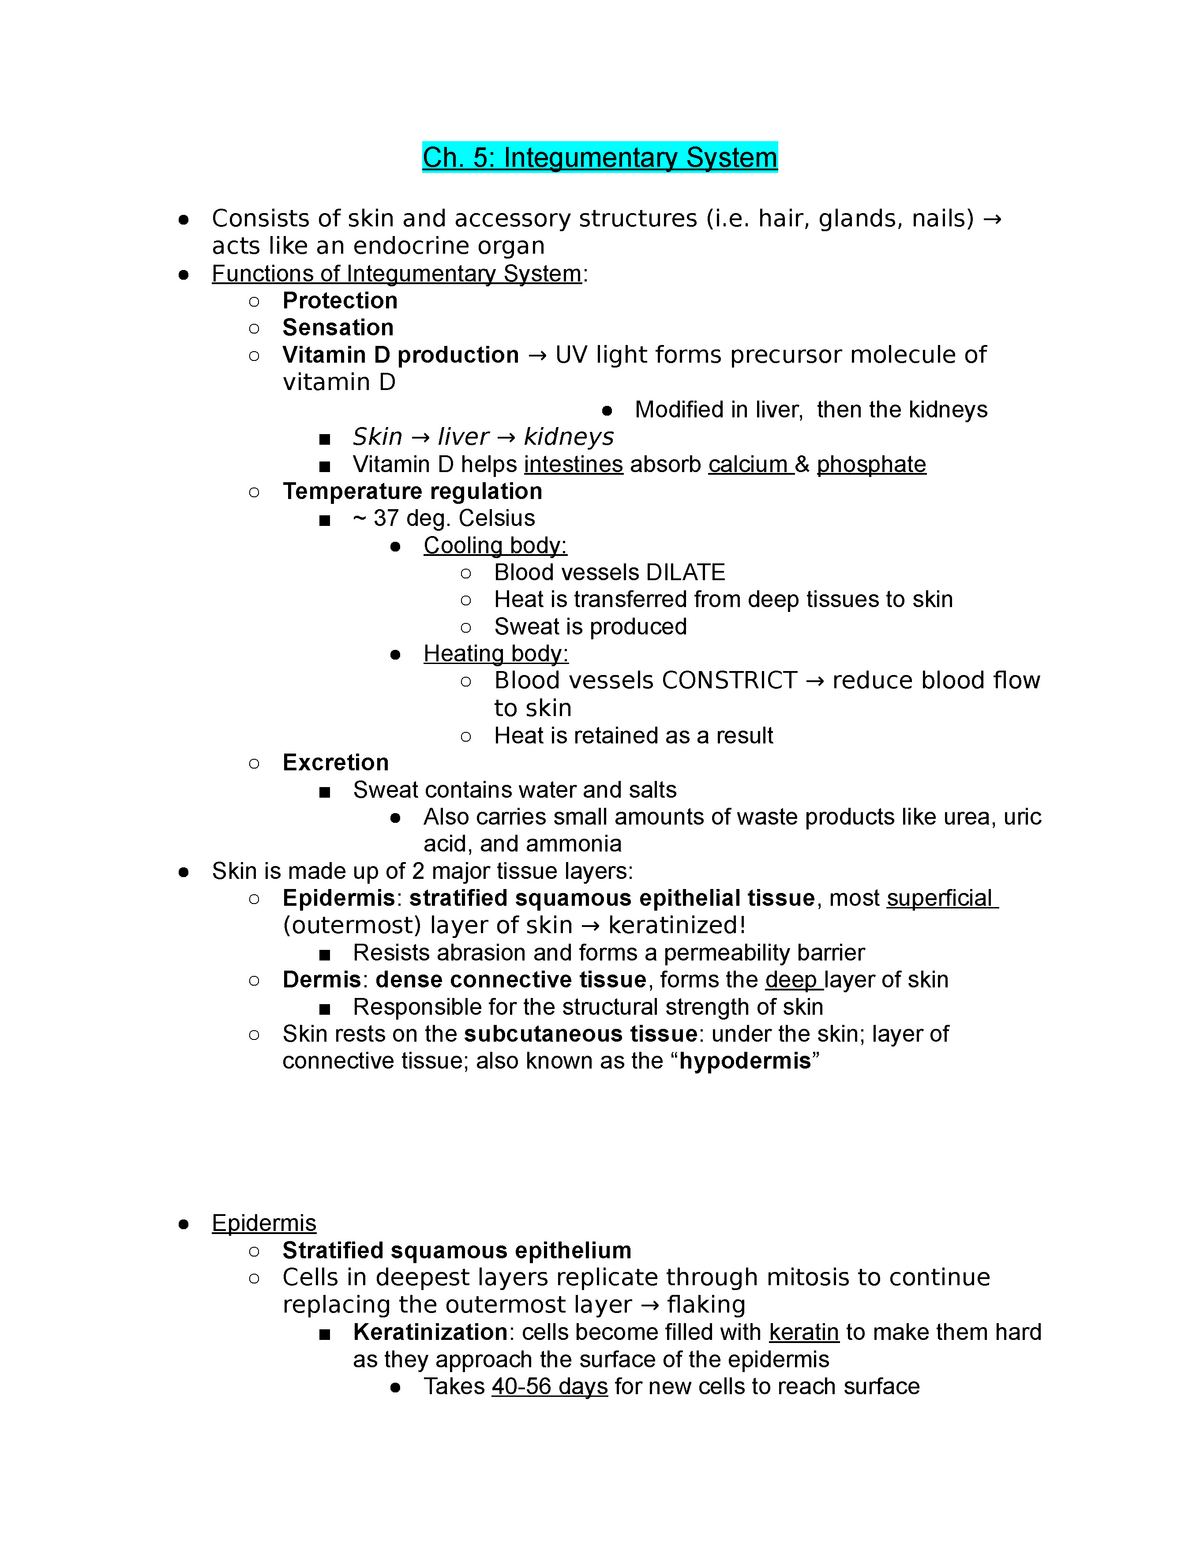 Integumentary System Worksheet Answers